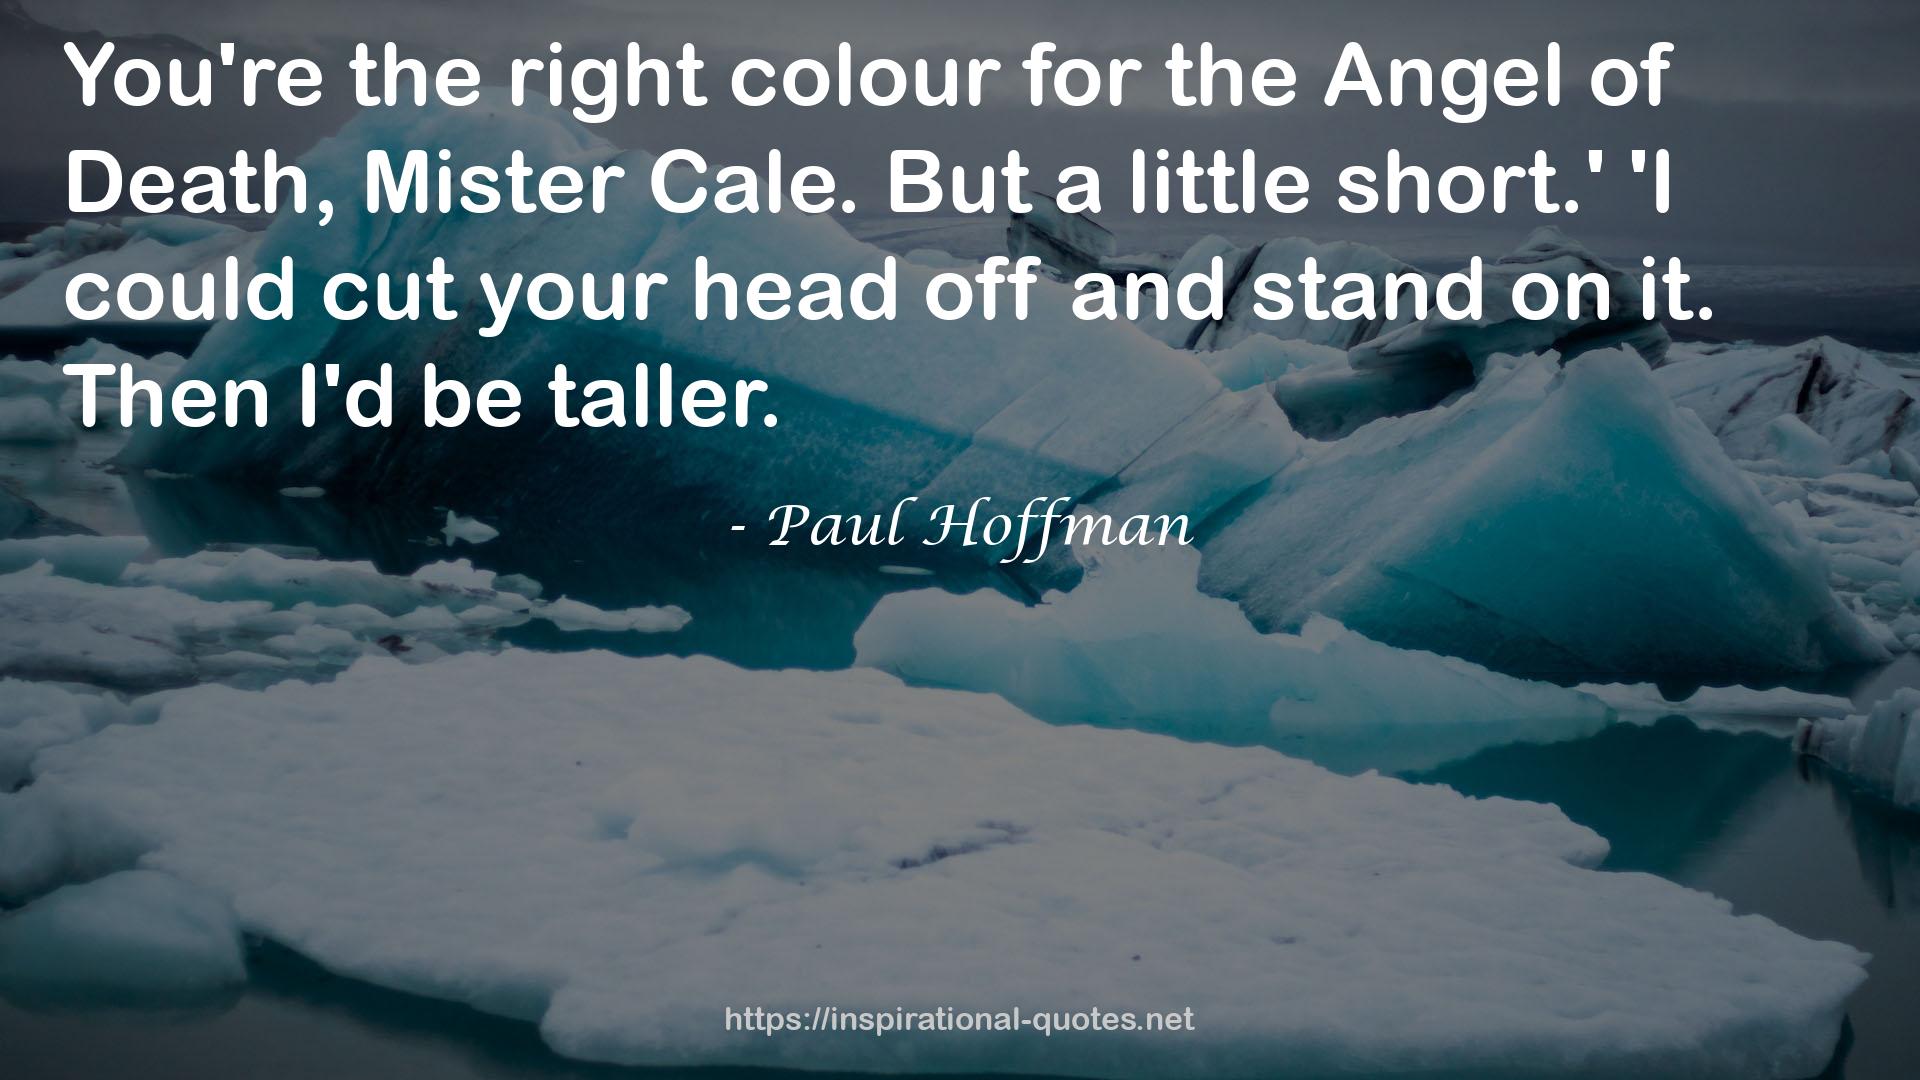 Paul Hoffman QUOTES